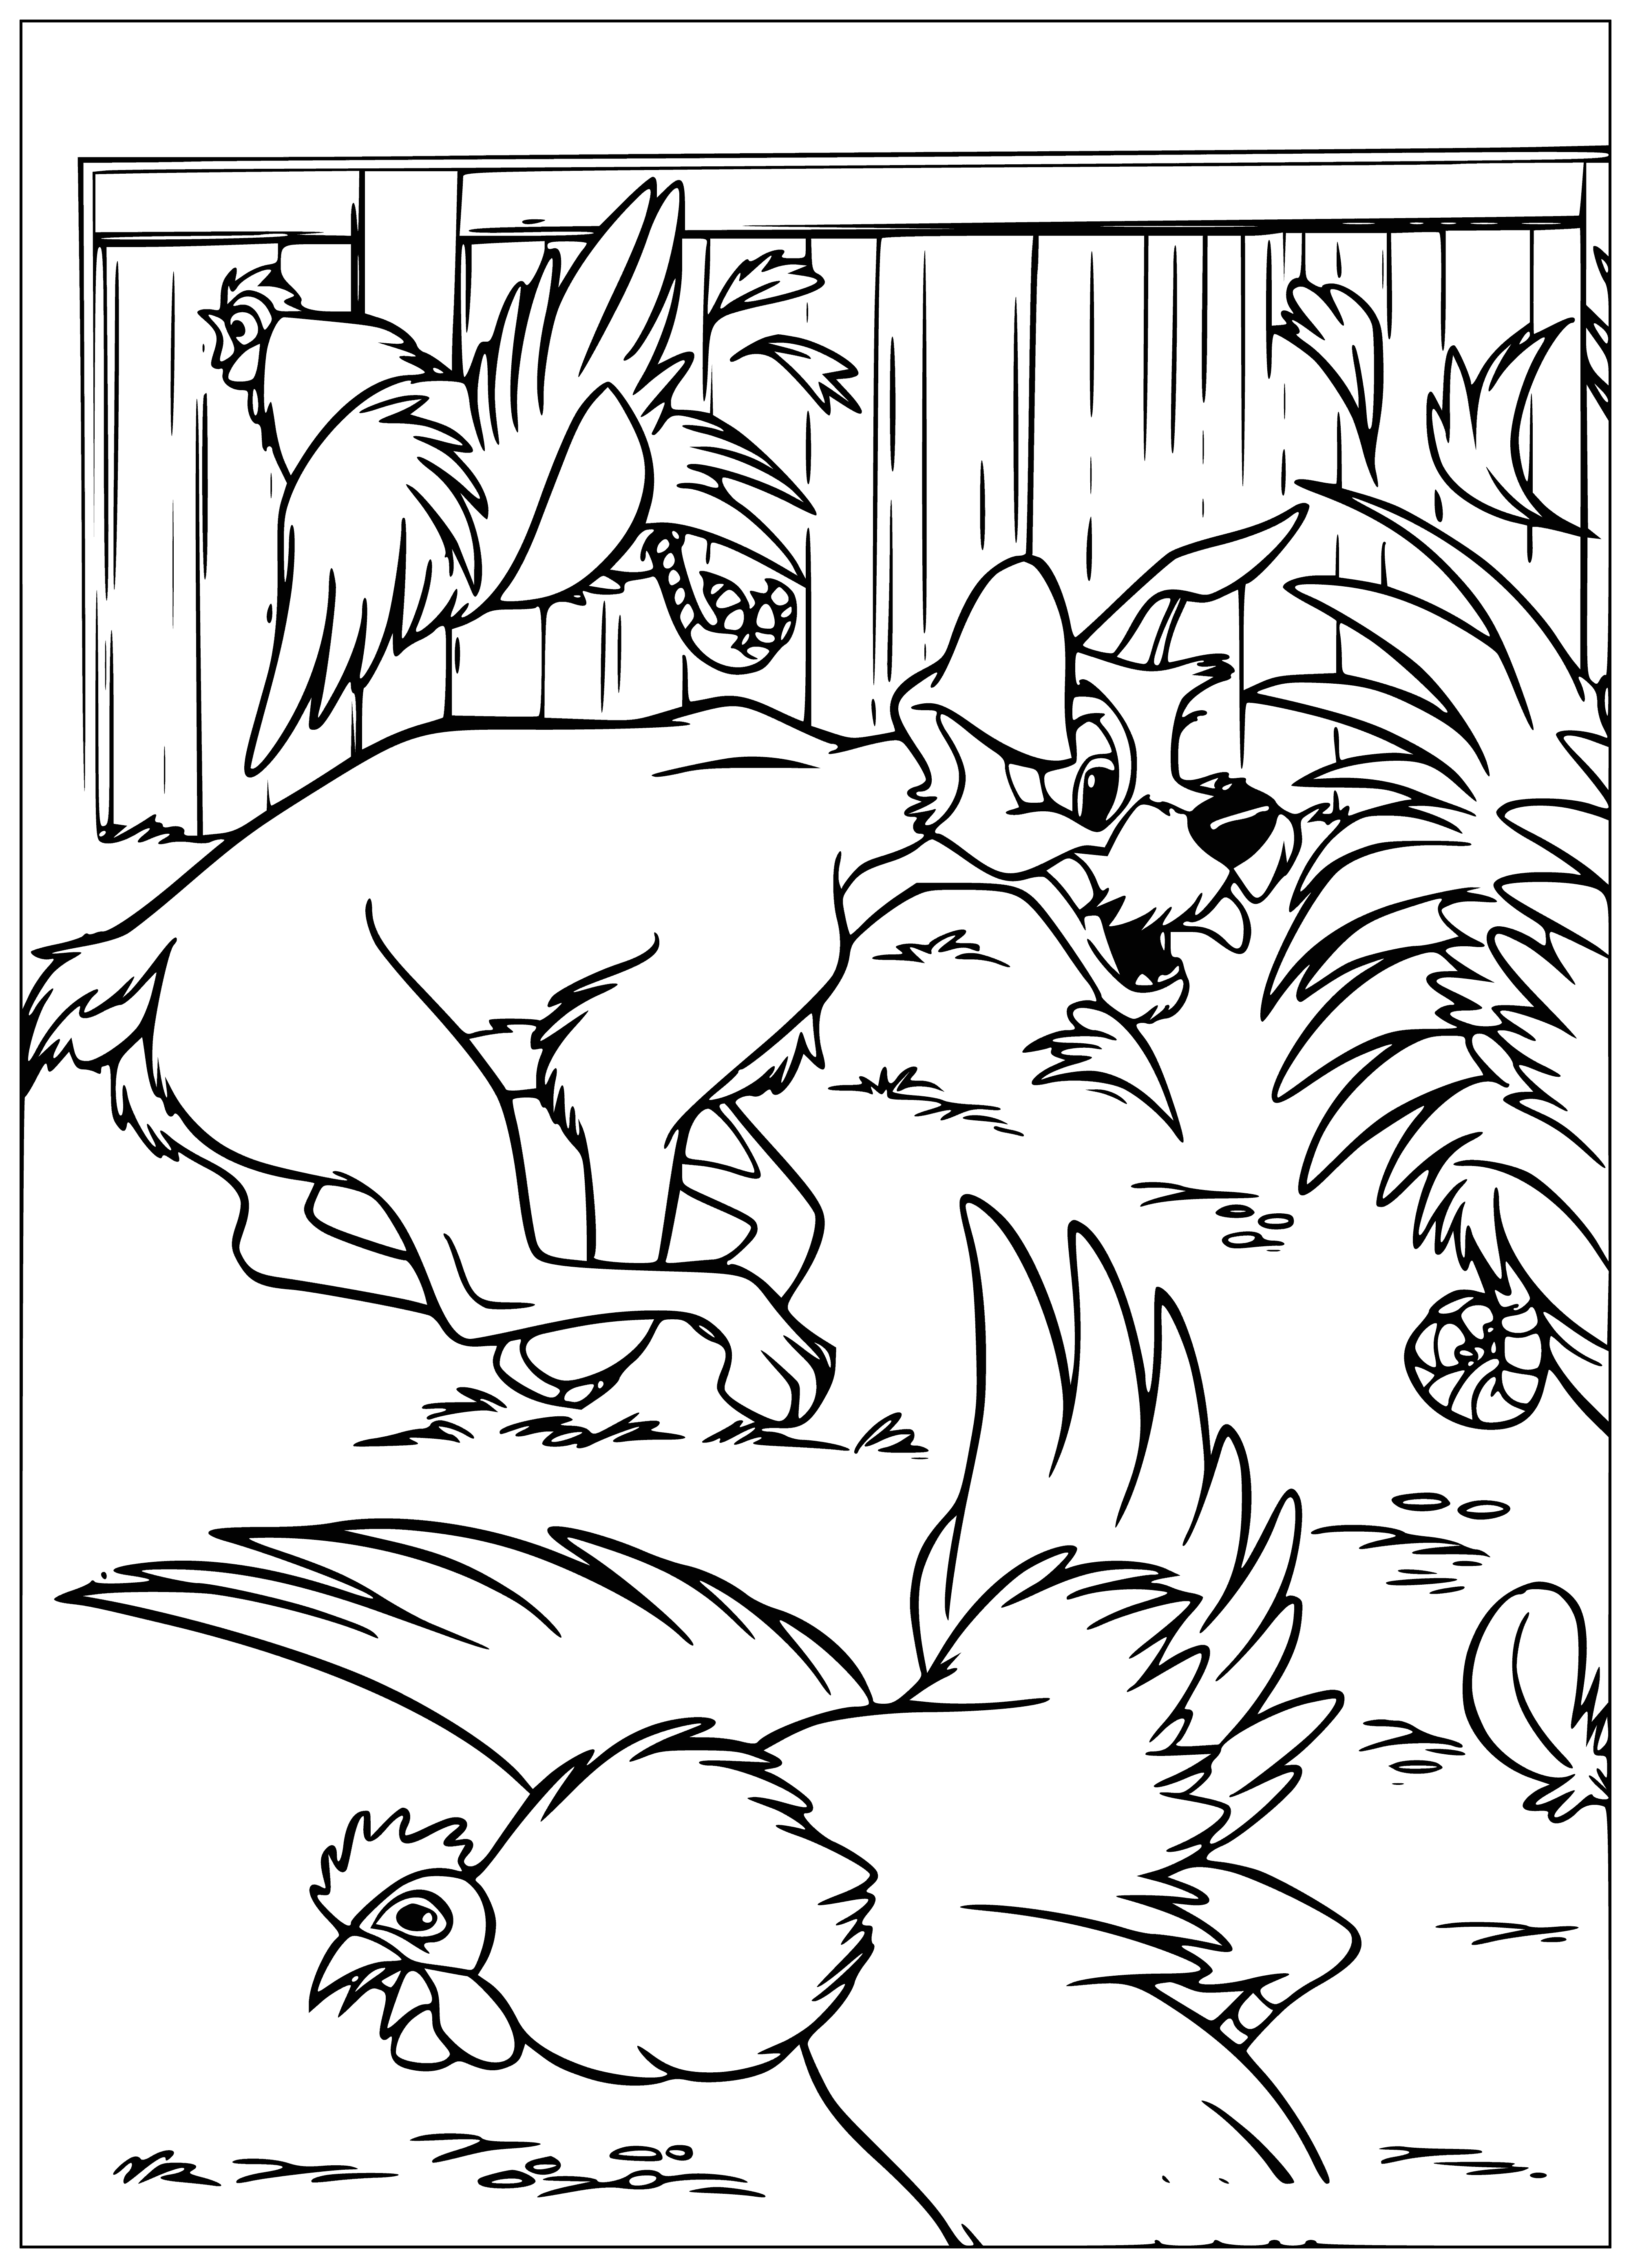 Tramp and chickens coloring page